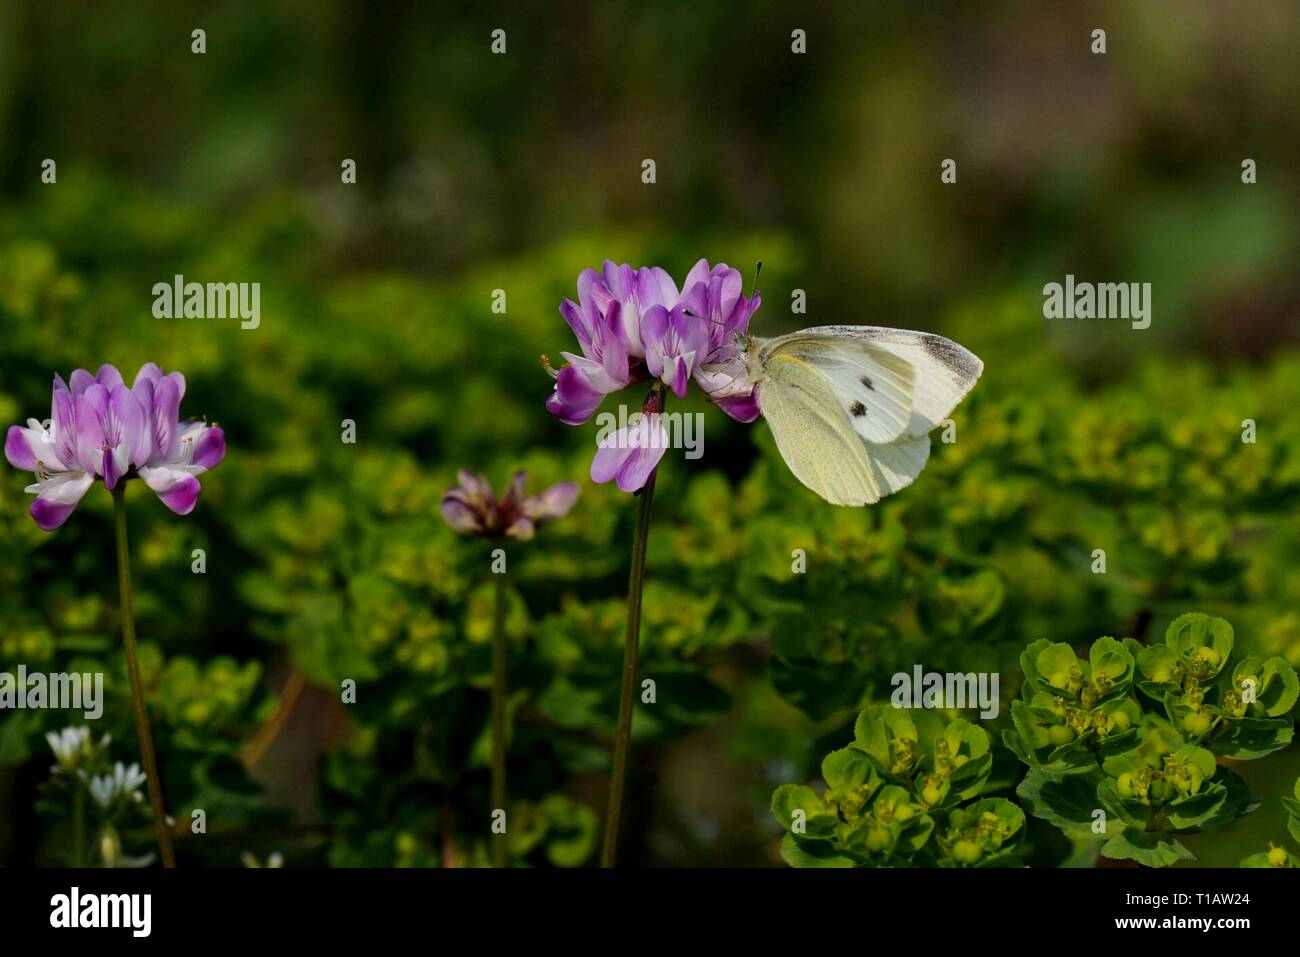 Shanghai, China. 23rd Mar, 2019. Milkvetch blossoms are seen in Dongjing Township, Songjiang District of Shanghai, east China, March 23, 2019. Credit: Zhang Jiansong/Xinhua/Alamy Live News Stock Photo